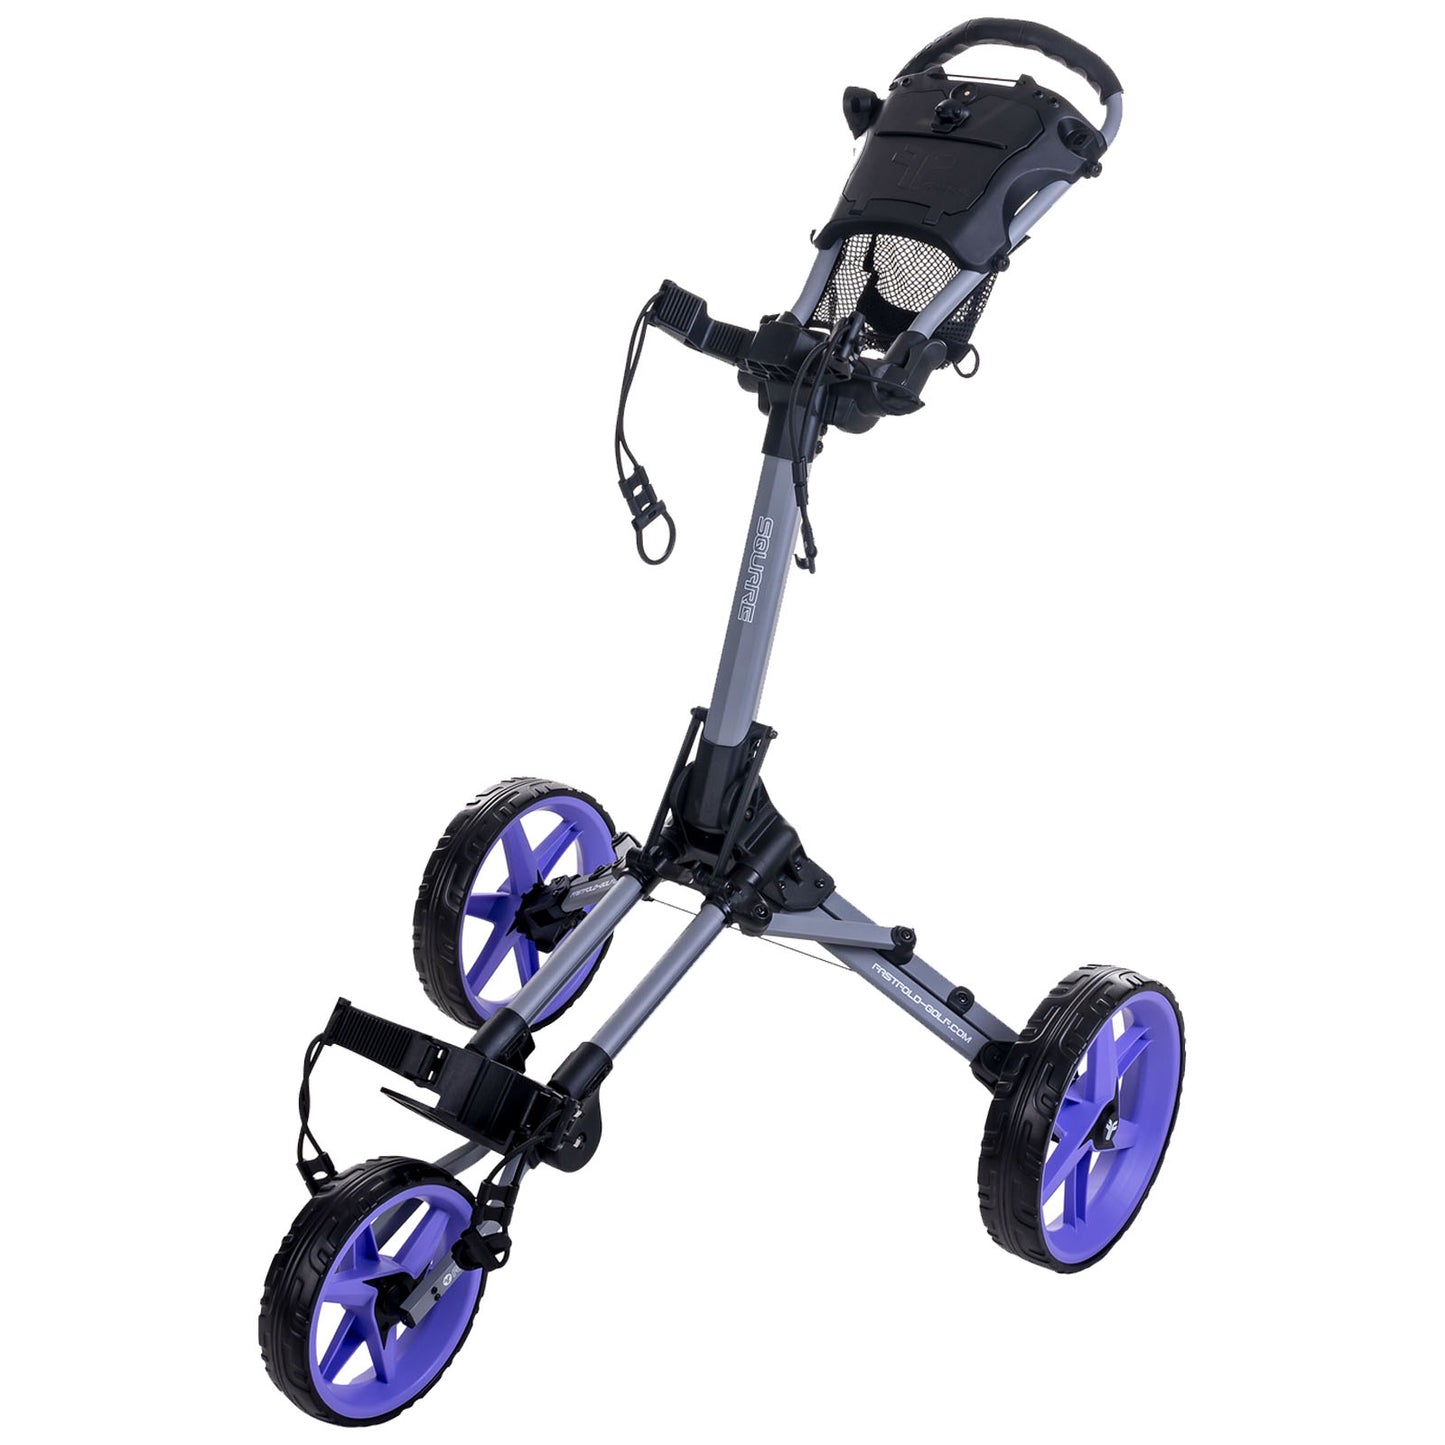 FastFold Square 3-Wheel Compact Golf Trolley